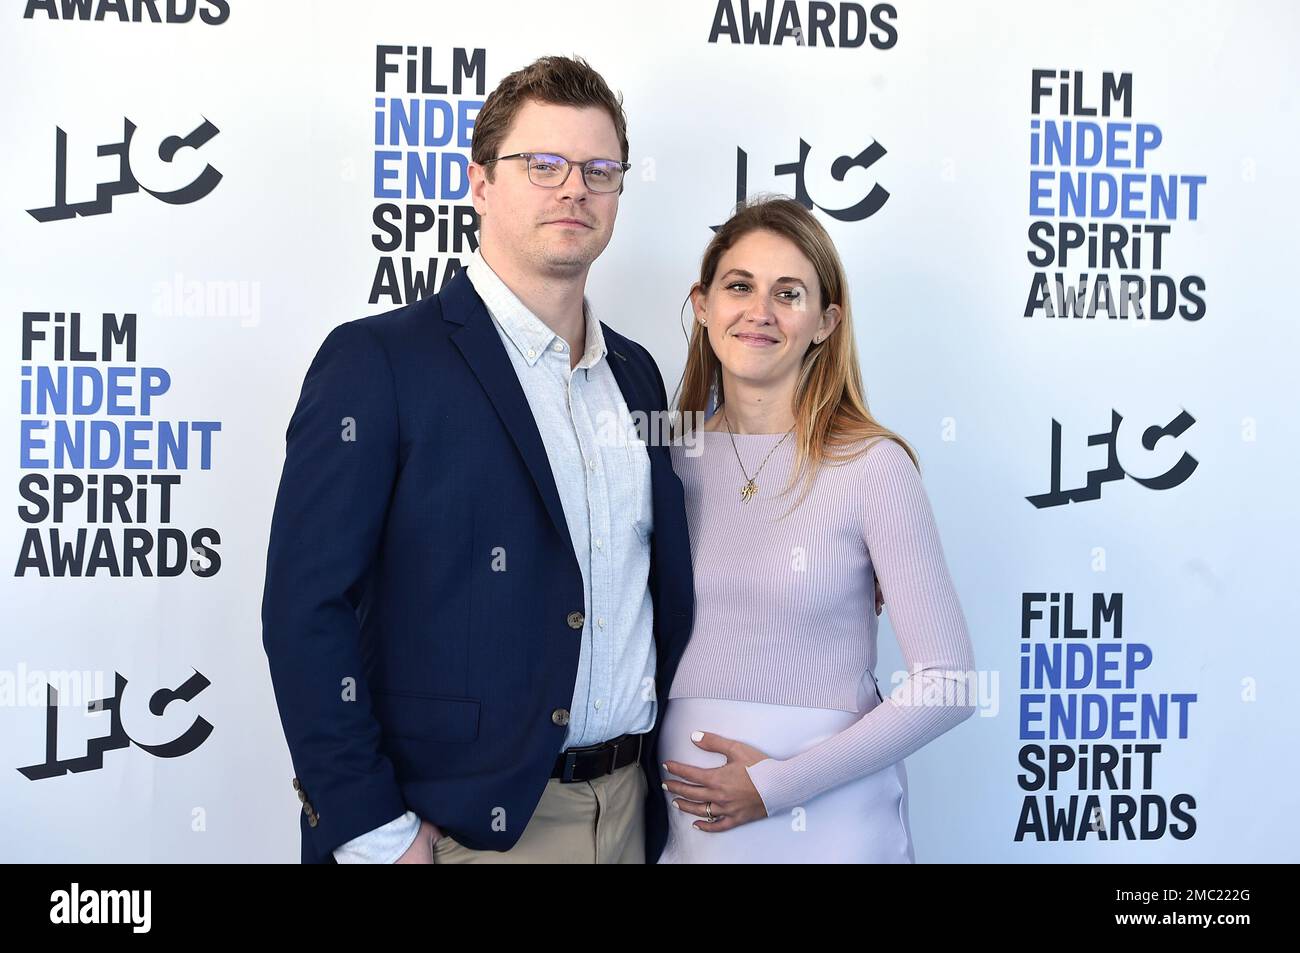 Noah Lang, left, and Tai Vardi Lang arrive at the 37th Film Independent Spirit Awards on Sunday, March 6, 2022, in Santa Monica, Calif. (Photo by Jordan Strauss/Invision/AP) Stock Photo